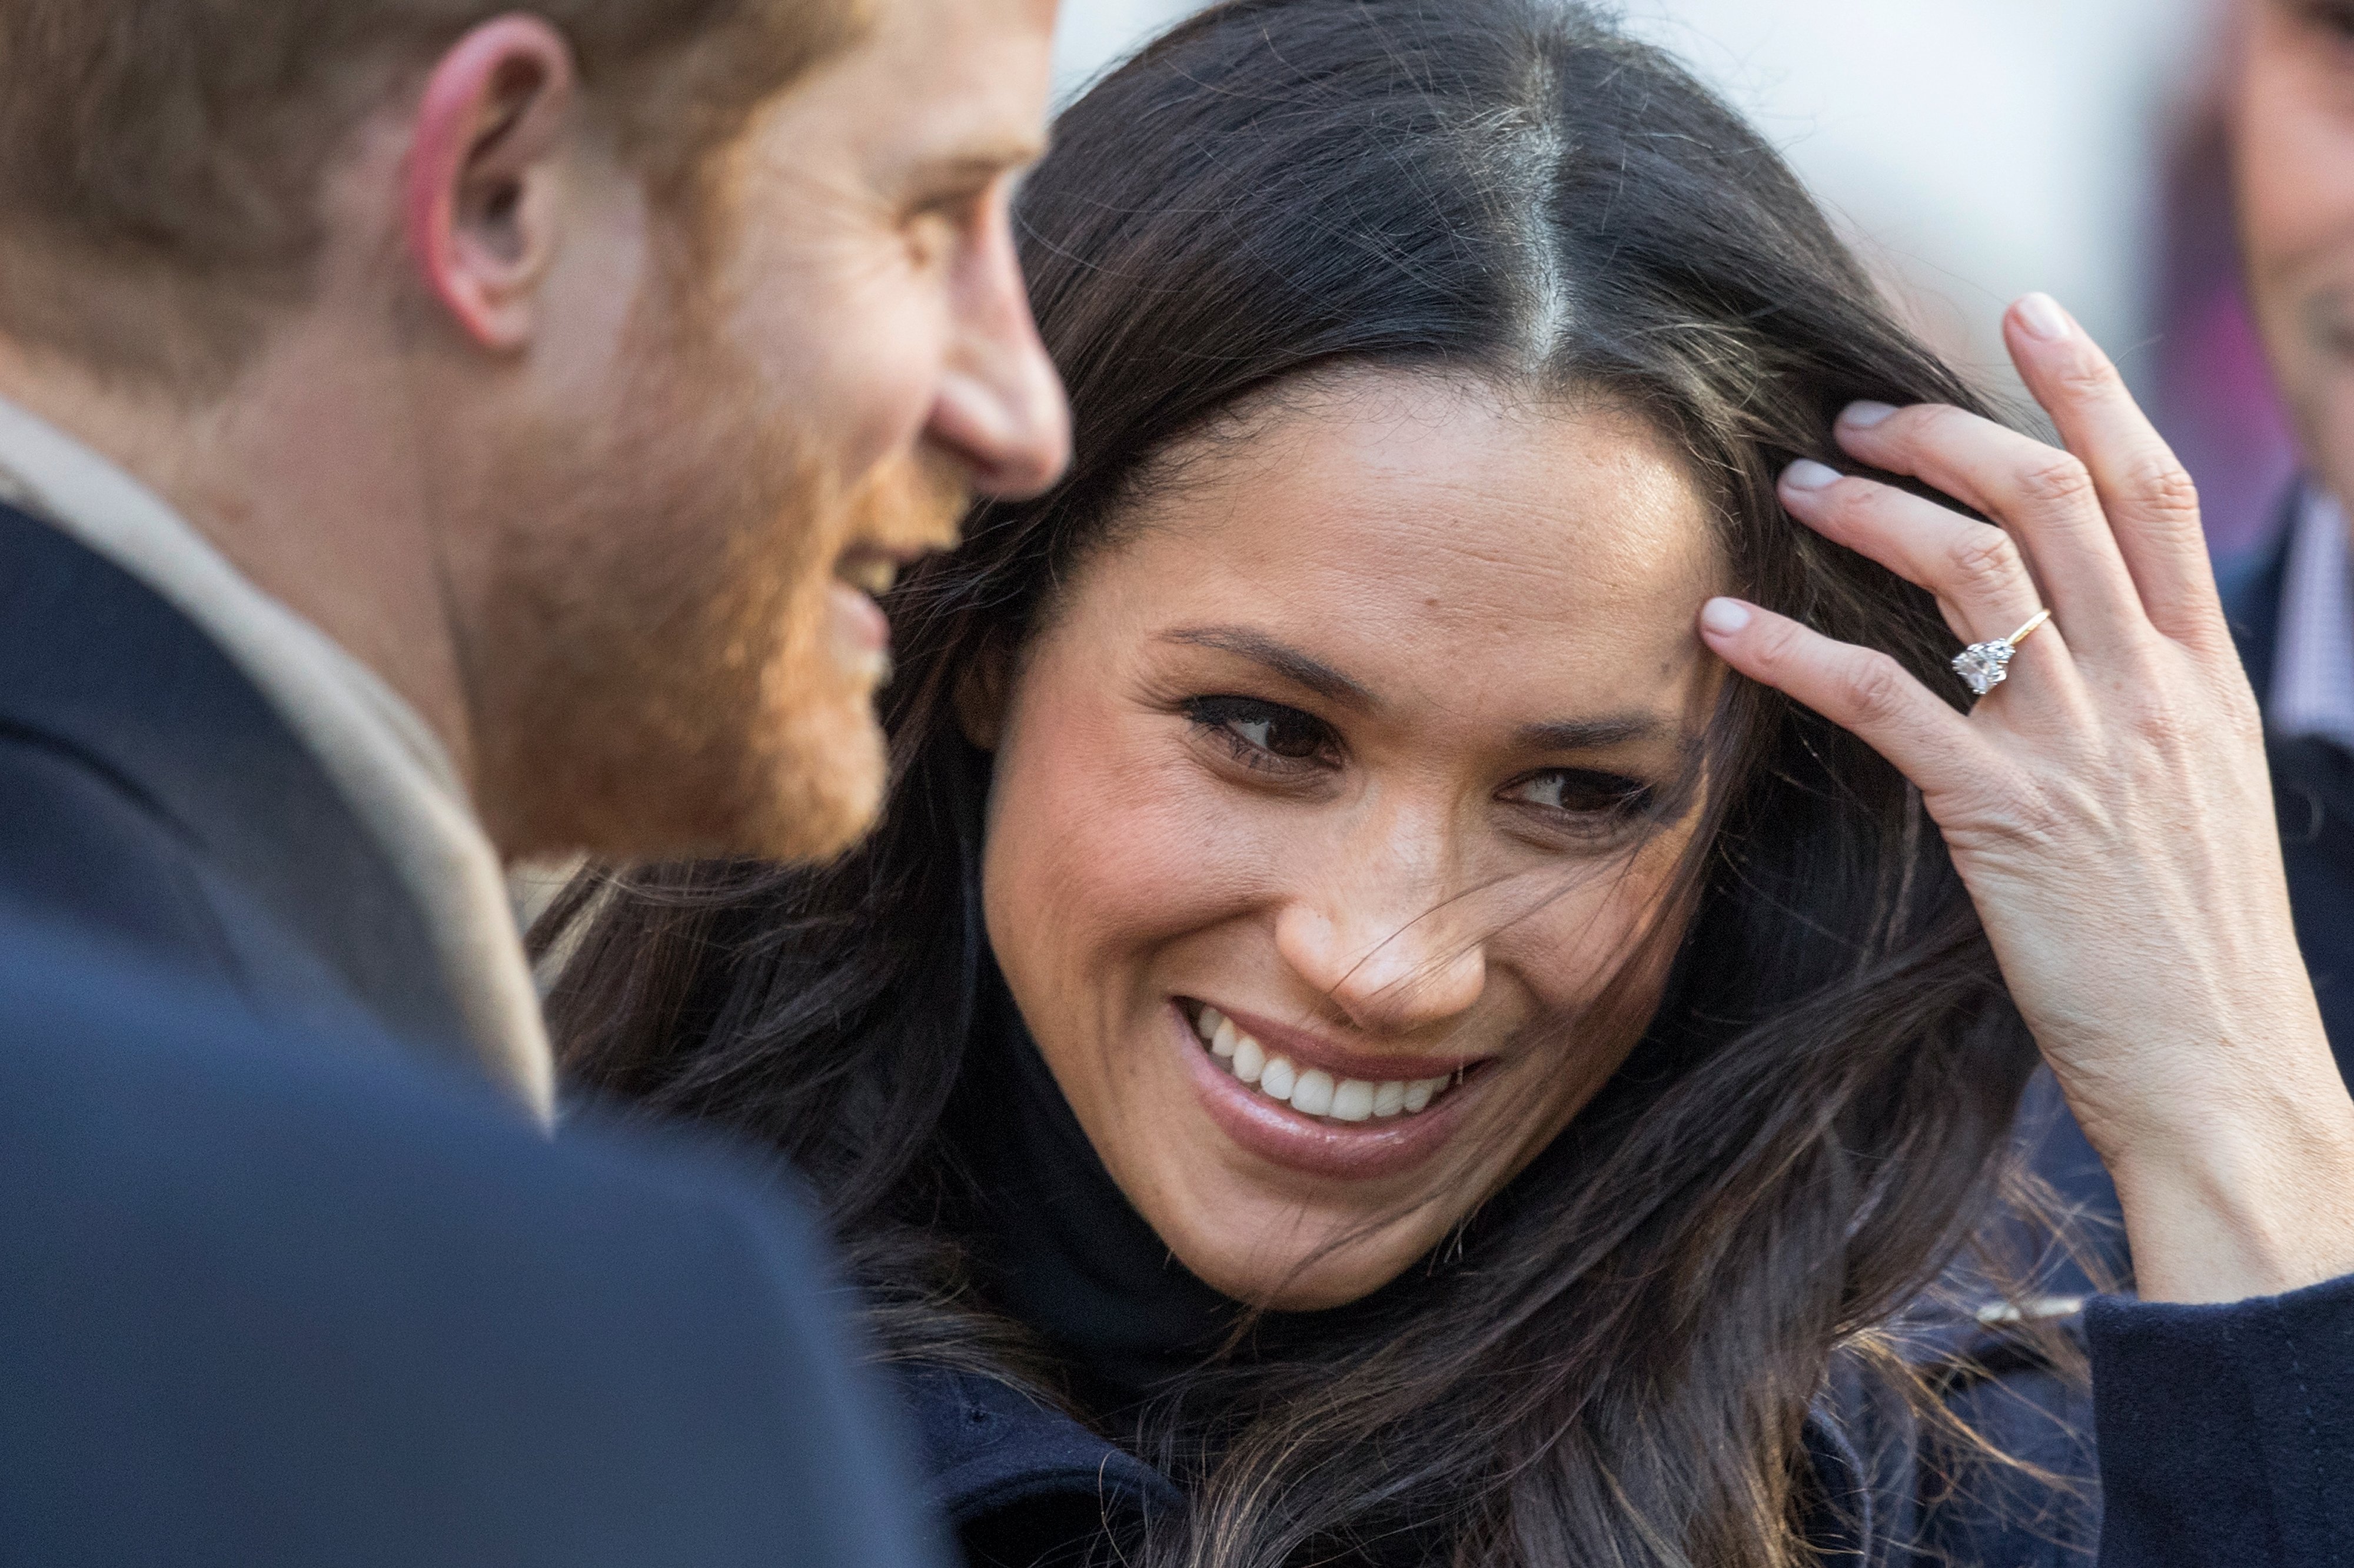 Meghan Markle and Prince Harry. | Source: Getty Images